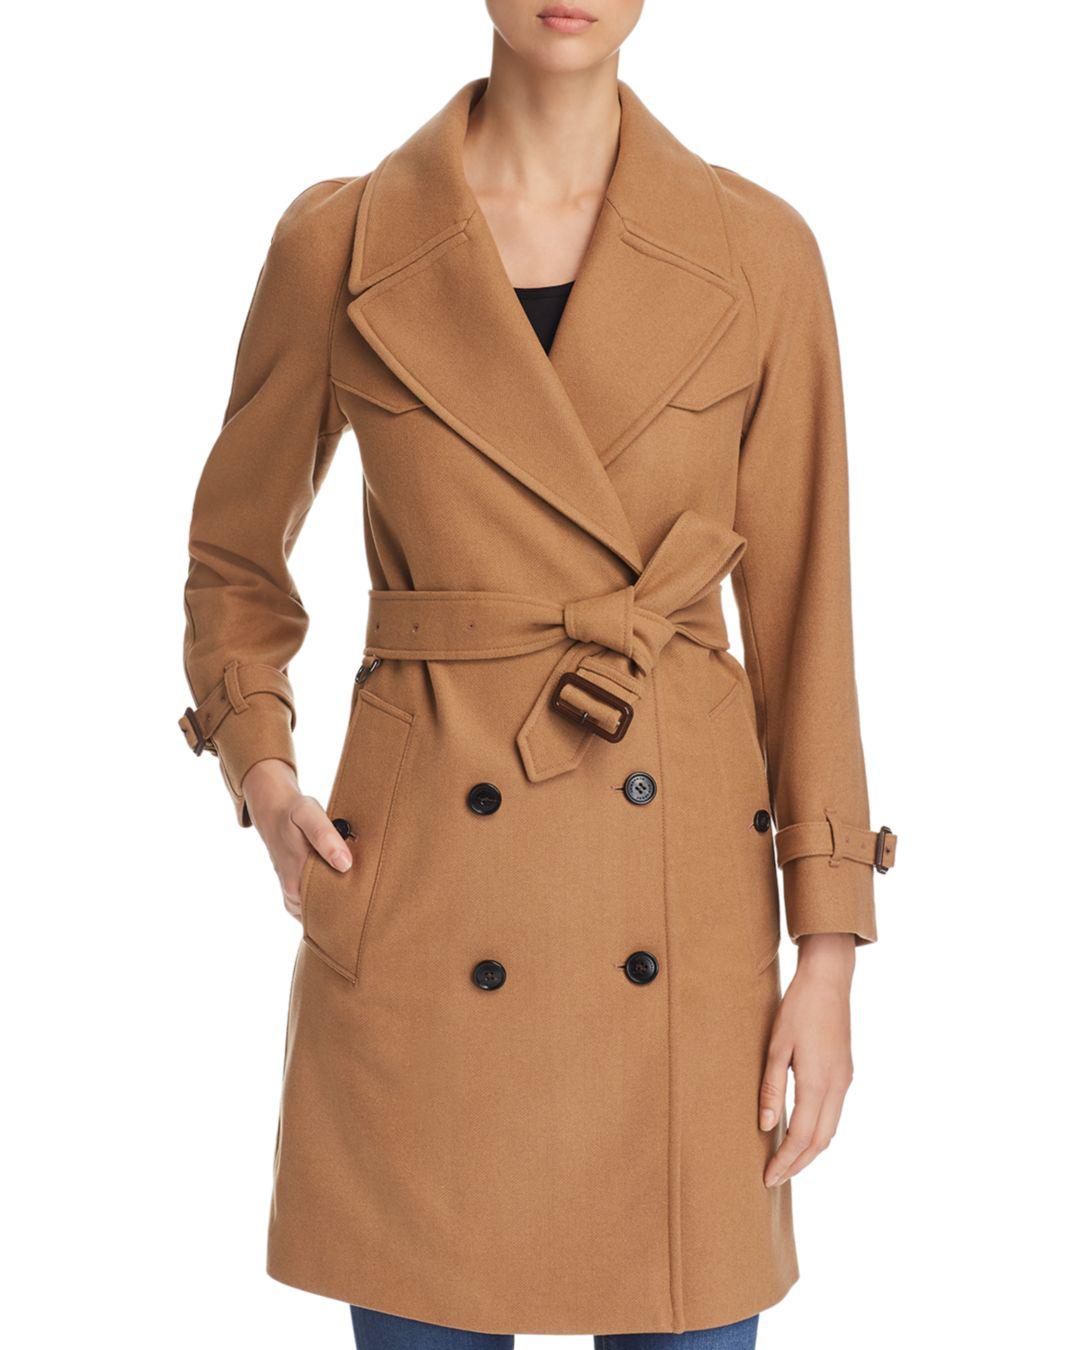 Burberry Cranston Trench Coat in Camel (Natural) | Lyst